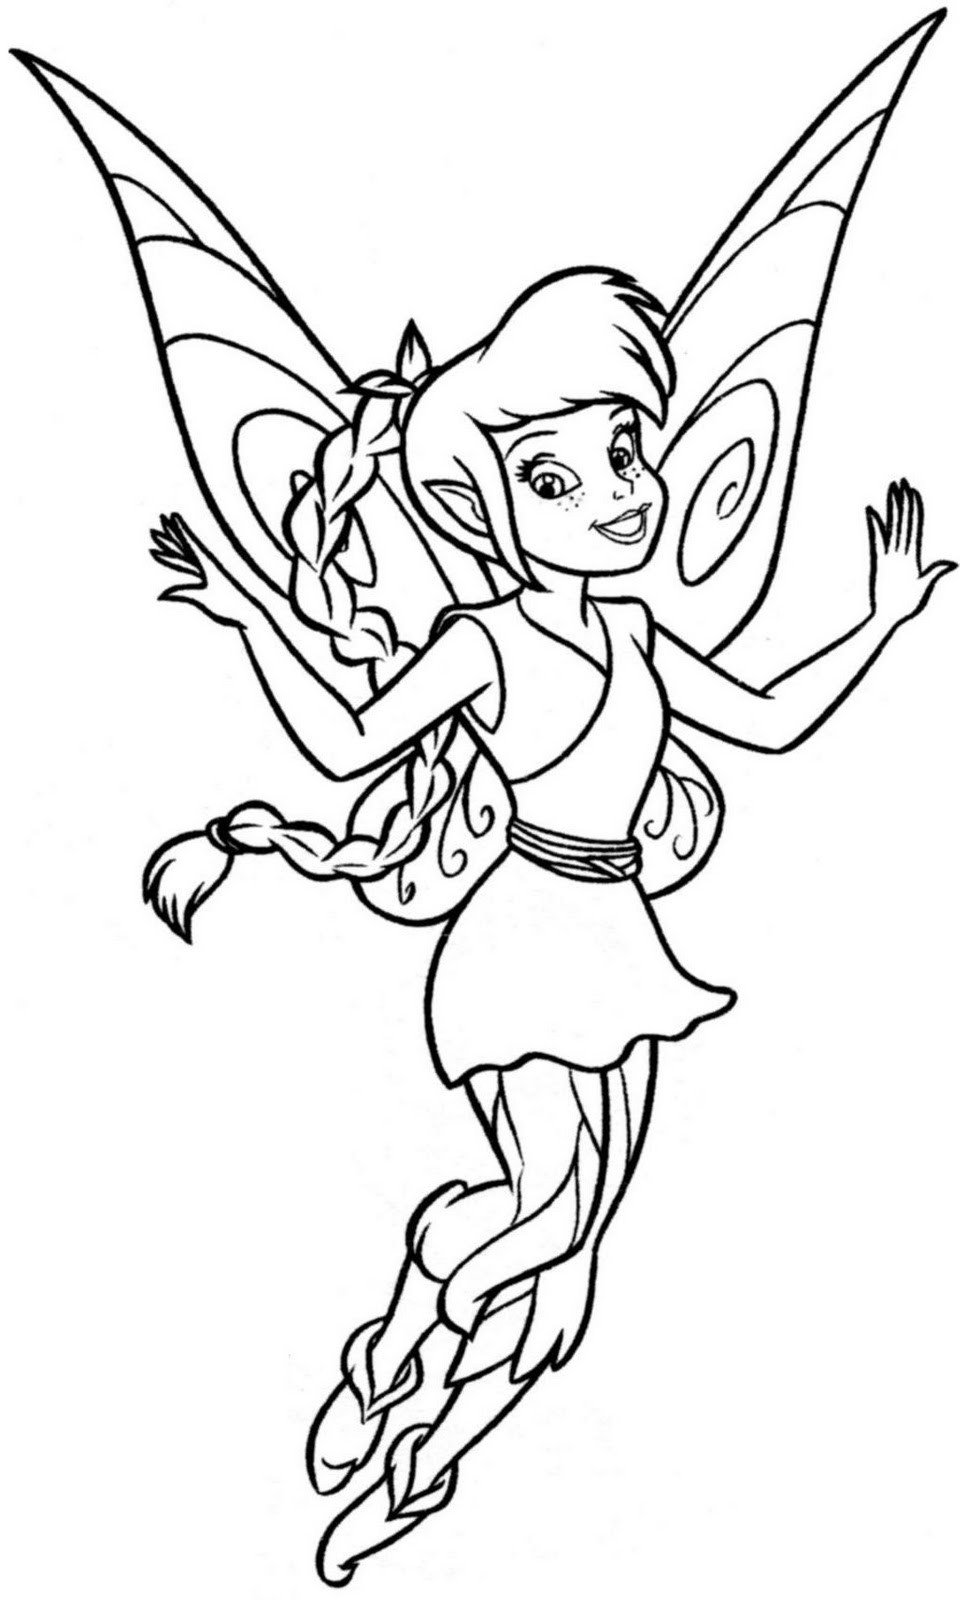 Fairy Coloring Pages For Kids
 Cute Cartoon Wallpaper